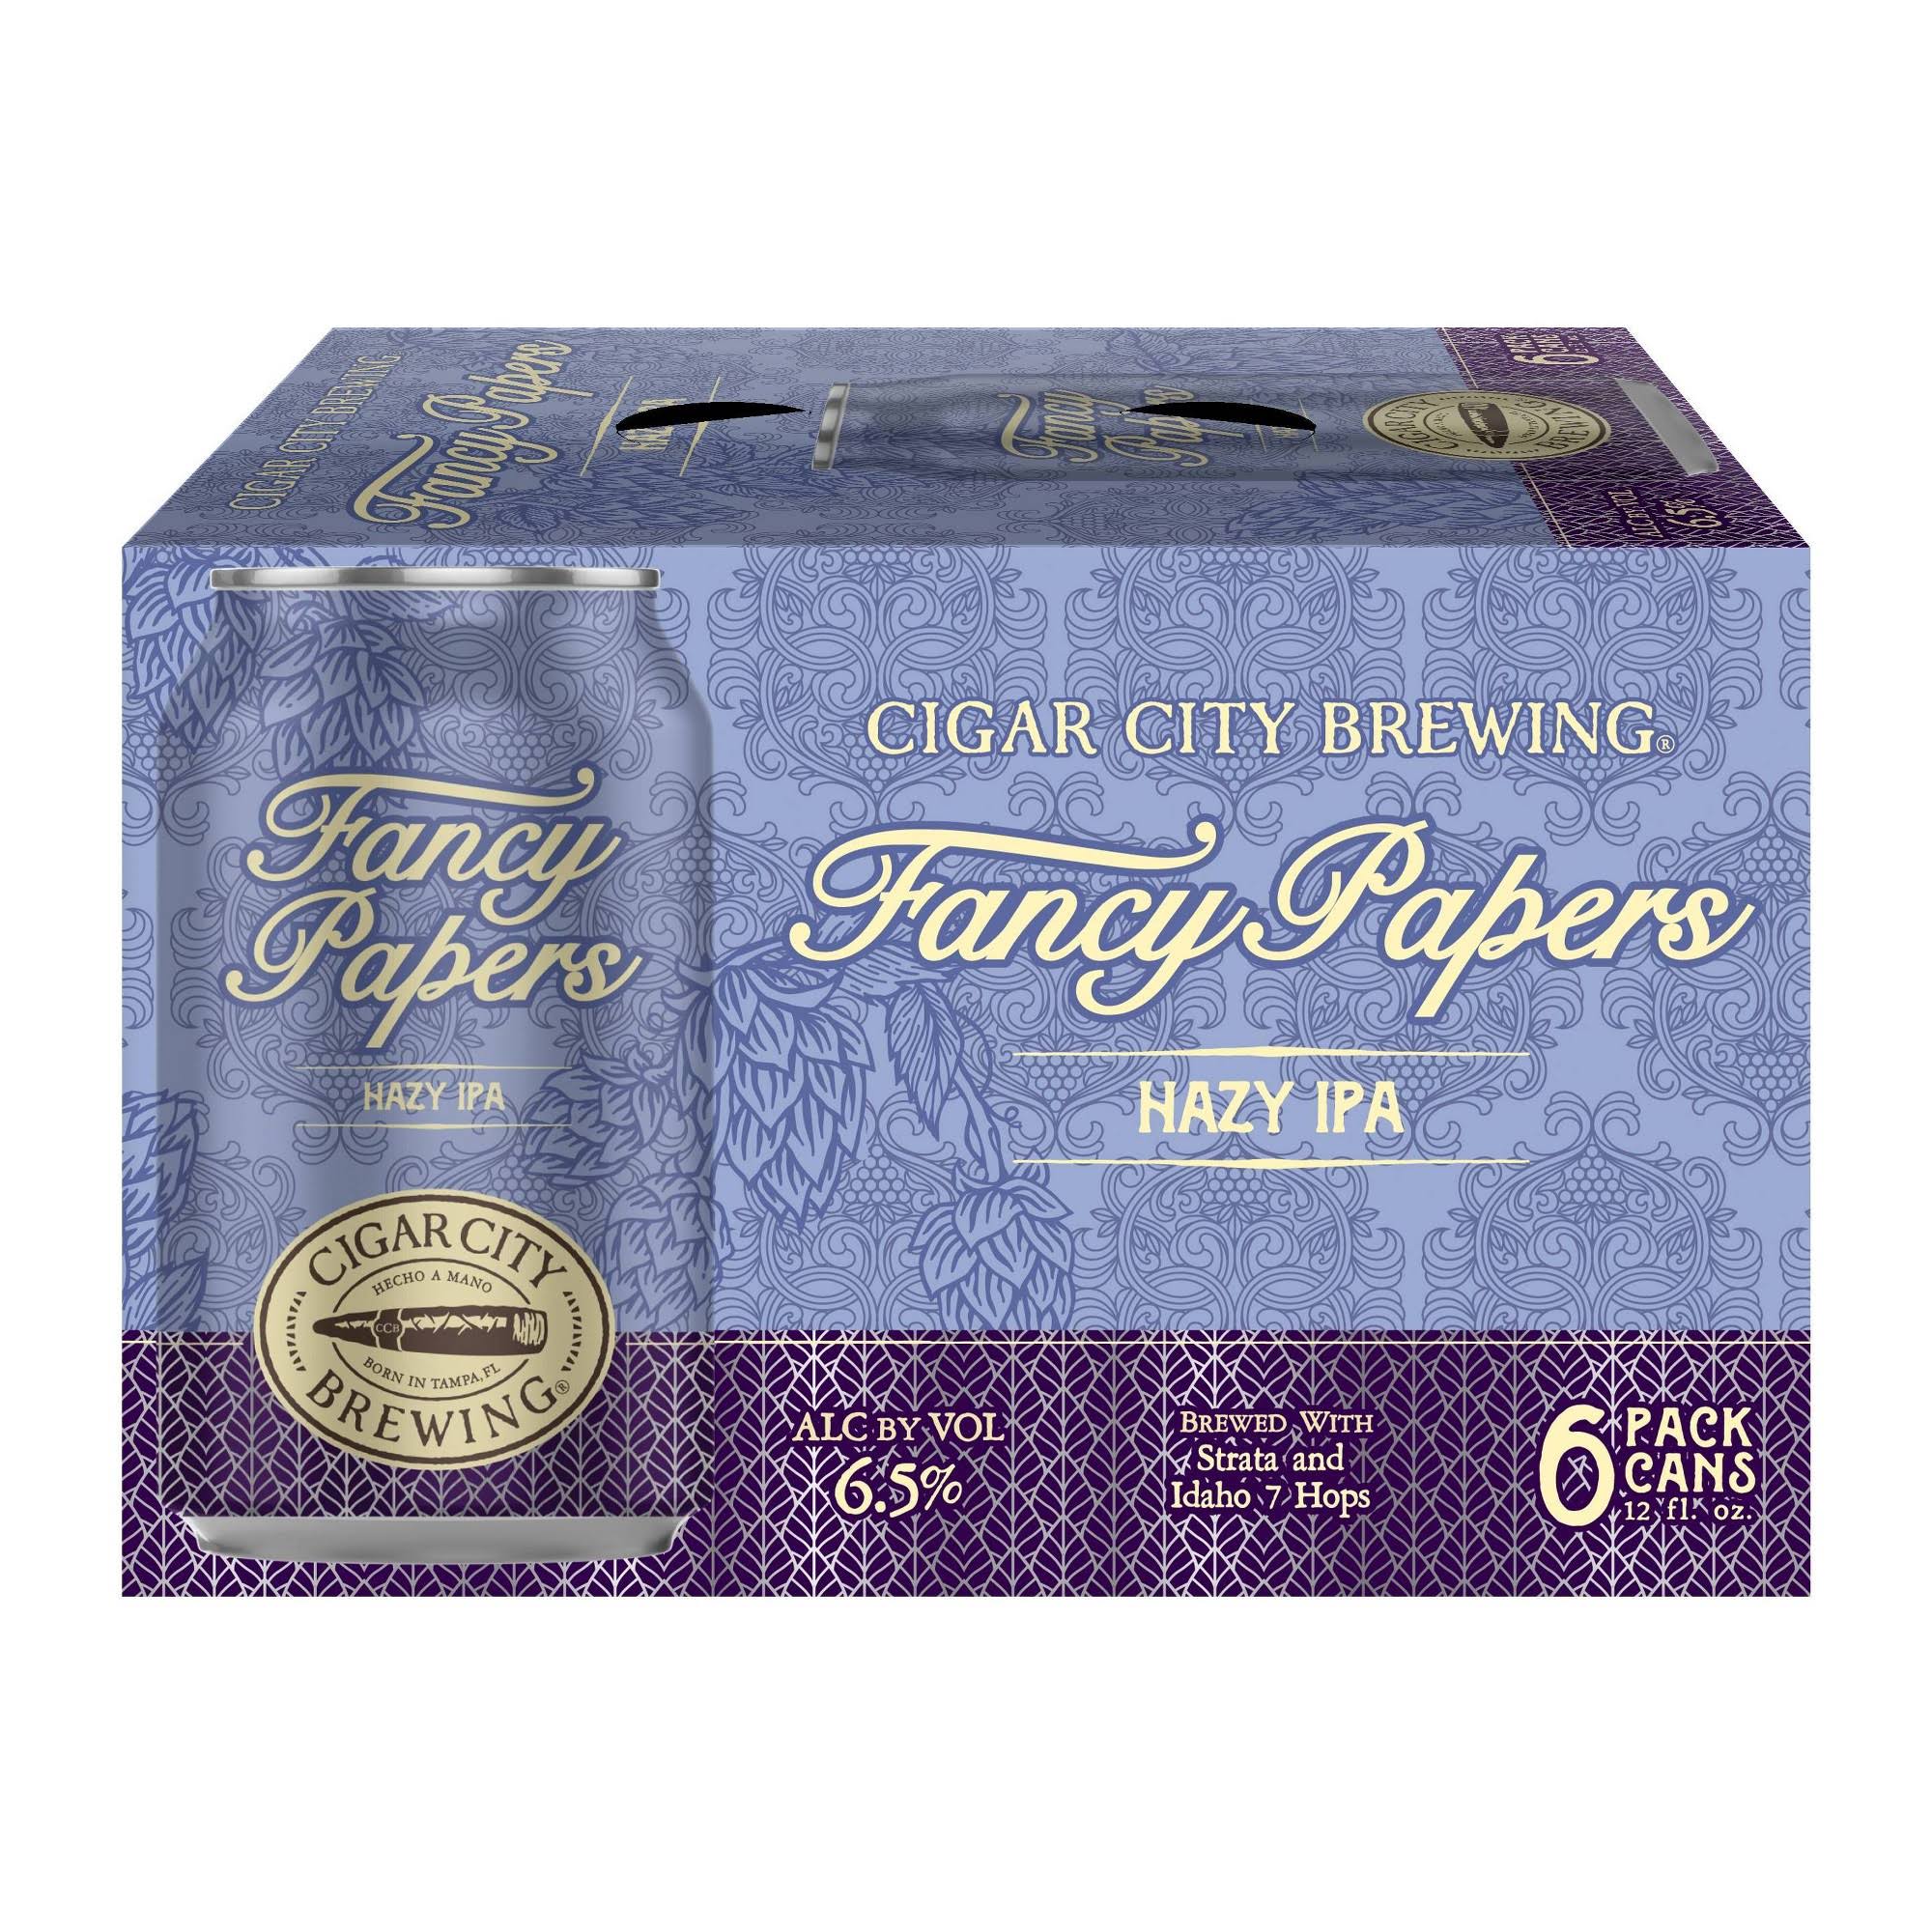 Cigar City Brewing Beer, Fancy Papers, 6 Pack - 6 pack, 12 fl oz cans